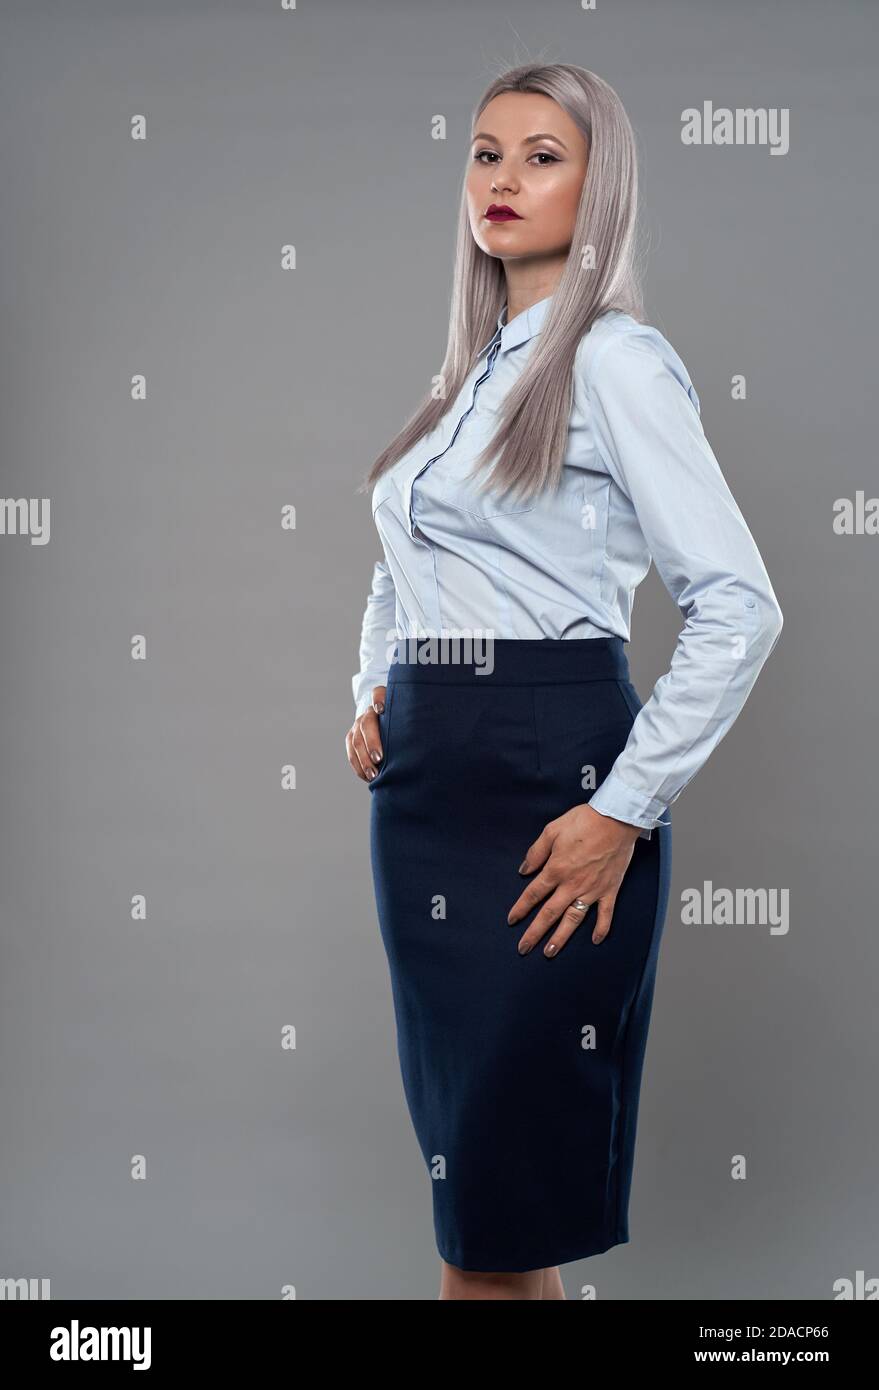 Young successful businesswoman with hands on hips in business suit Stock Photo